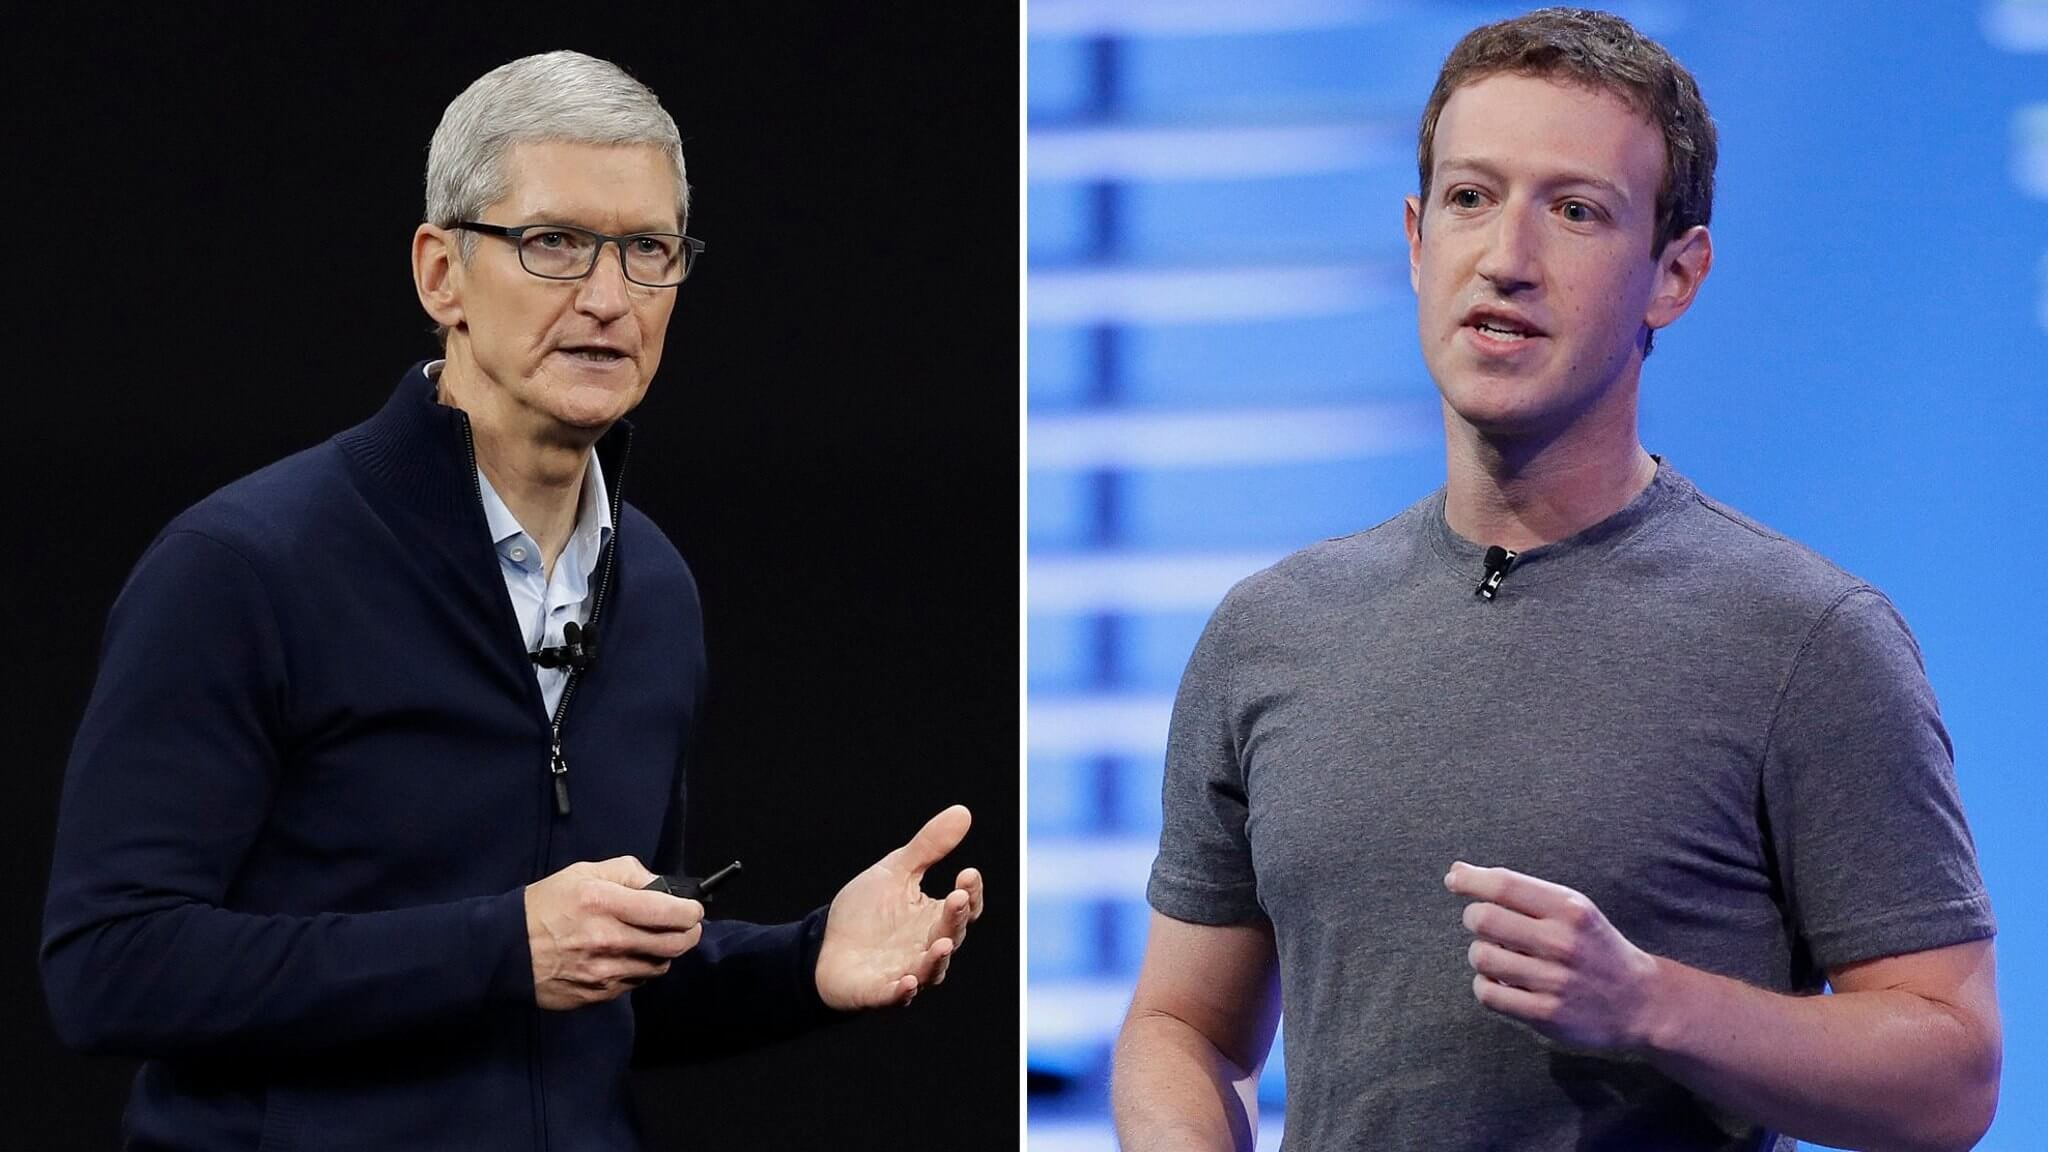 Zuckerberg vs. Cook: CEOs continue their subtle feud over business philosophies